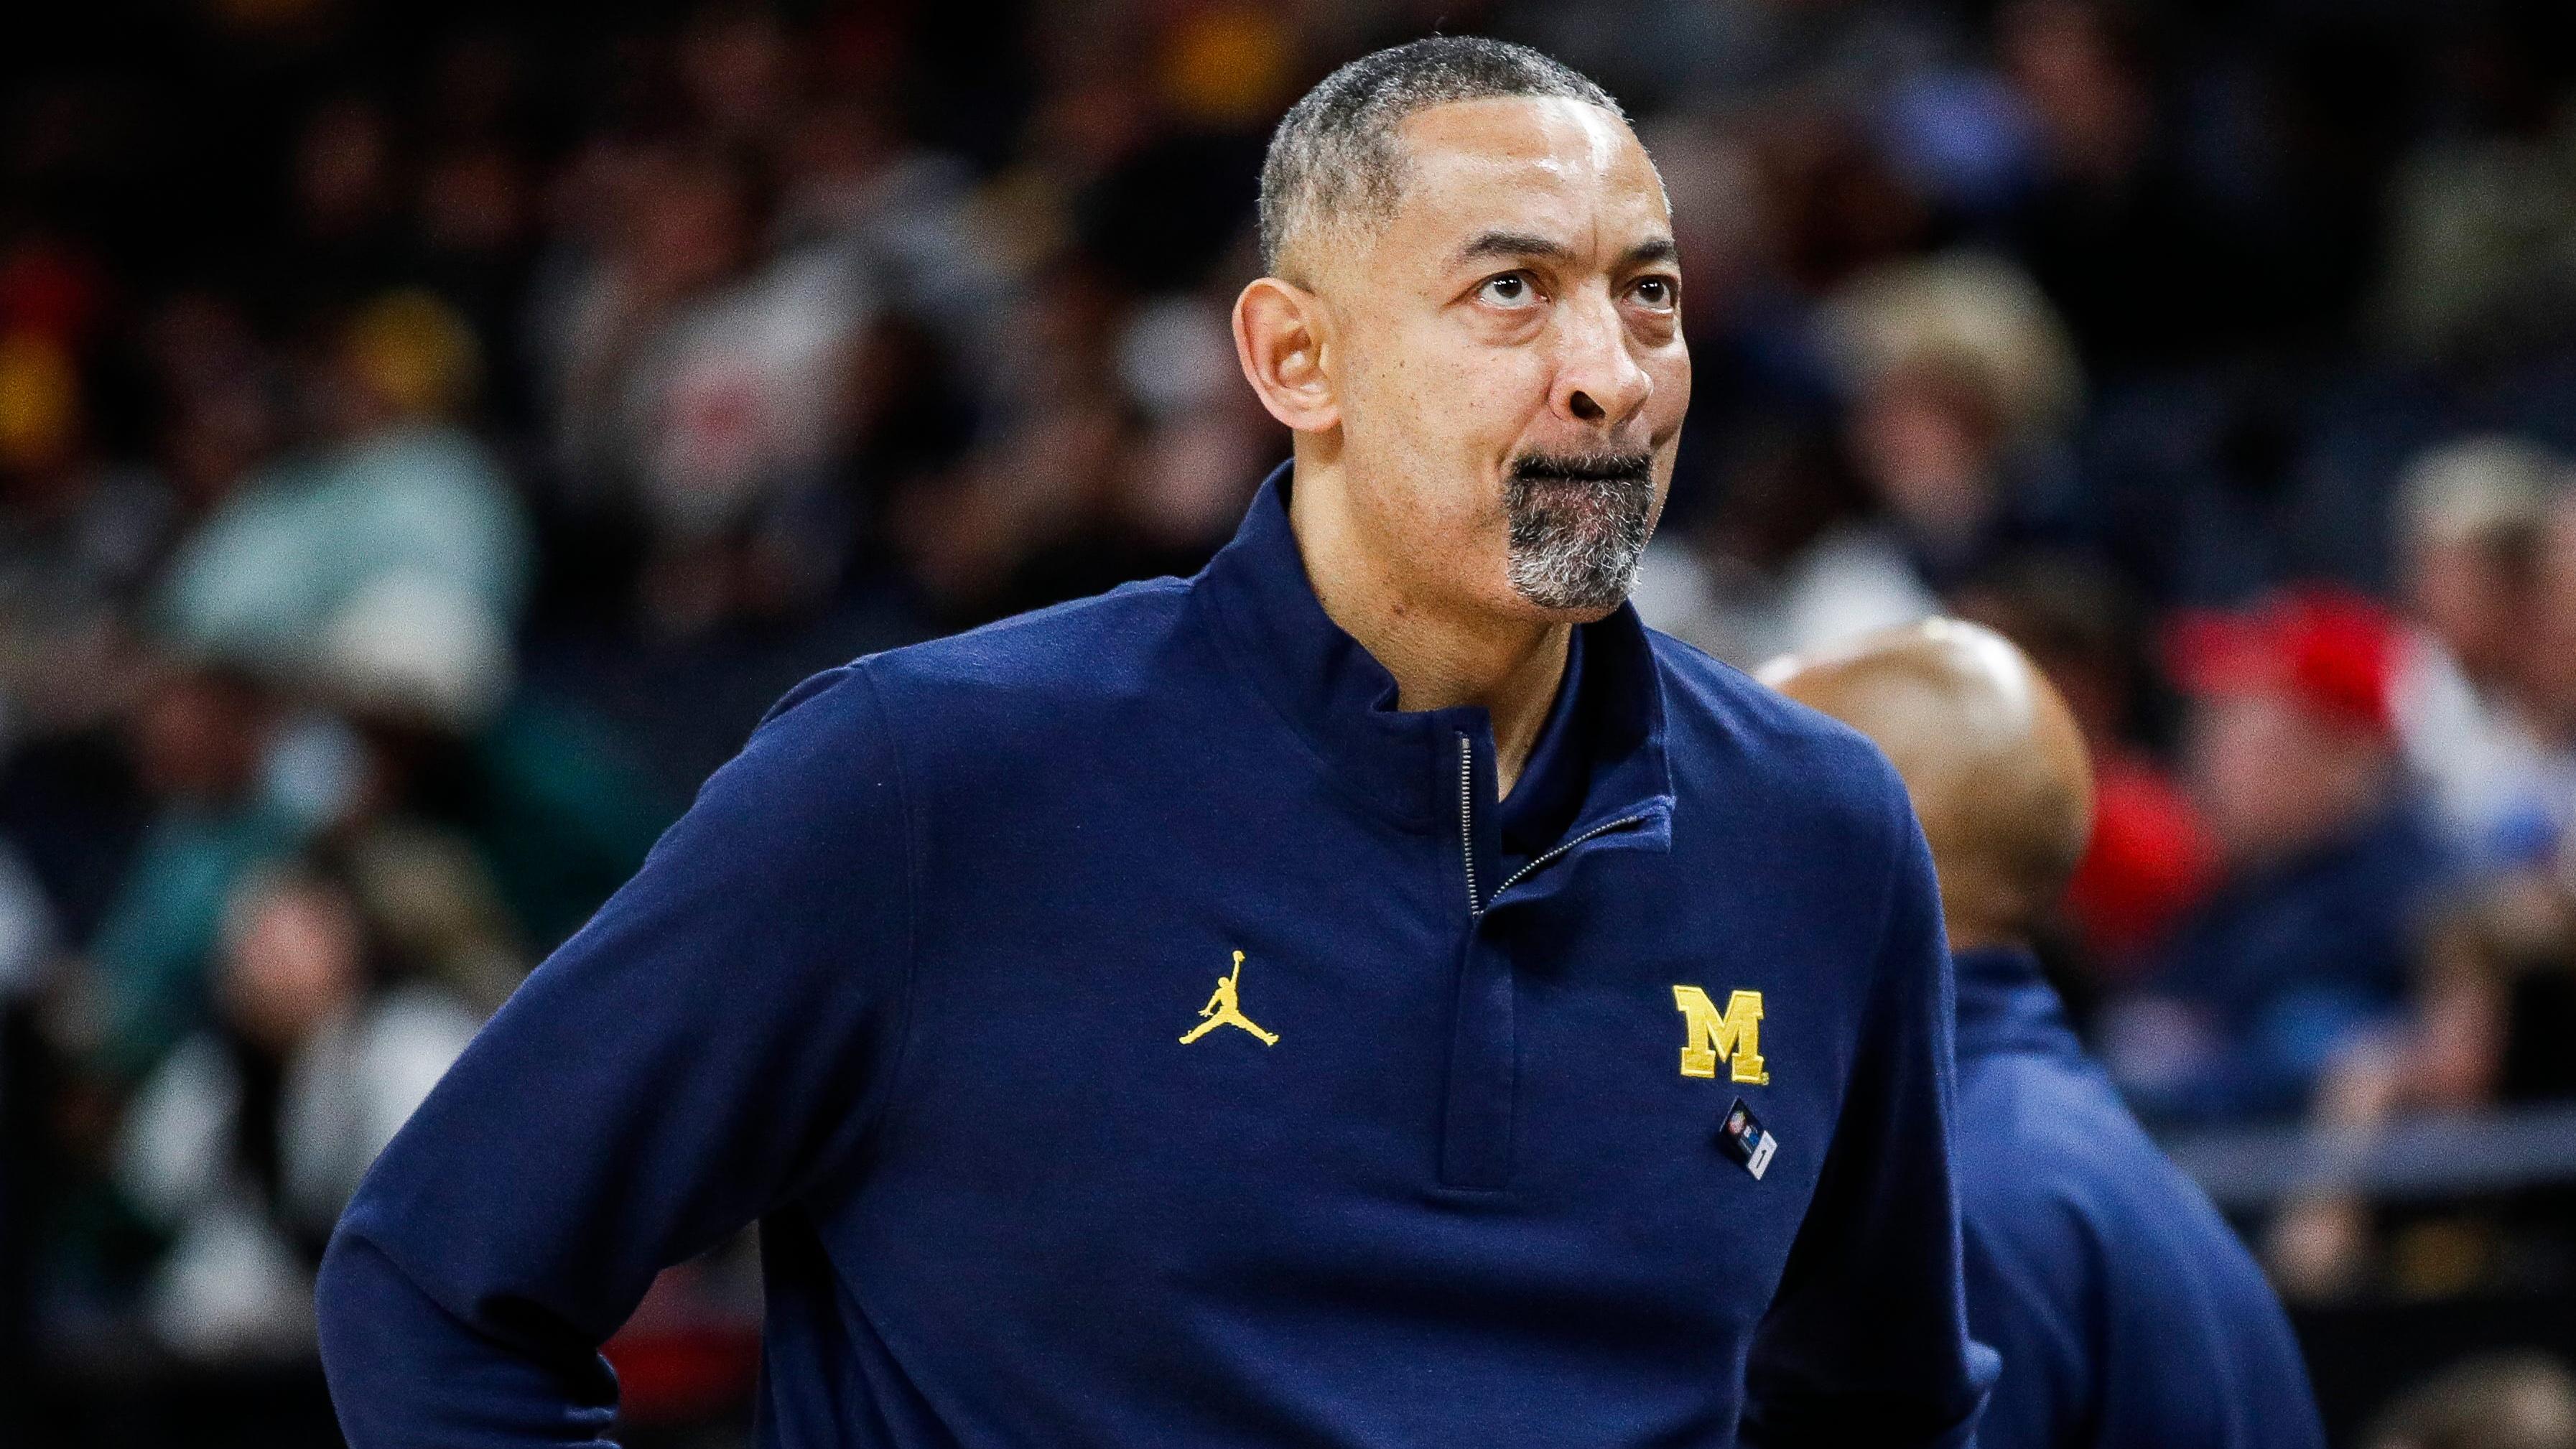 Michigan head coach Juwan Howard reacts to a play against Penn State during the second half of the First Round of Big Ten tournament at Target Center in Minneapolis, Minn. on Wednesday, March 13, 2024. / Junfu Han / USA TODAY NETWORK